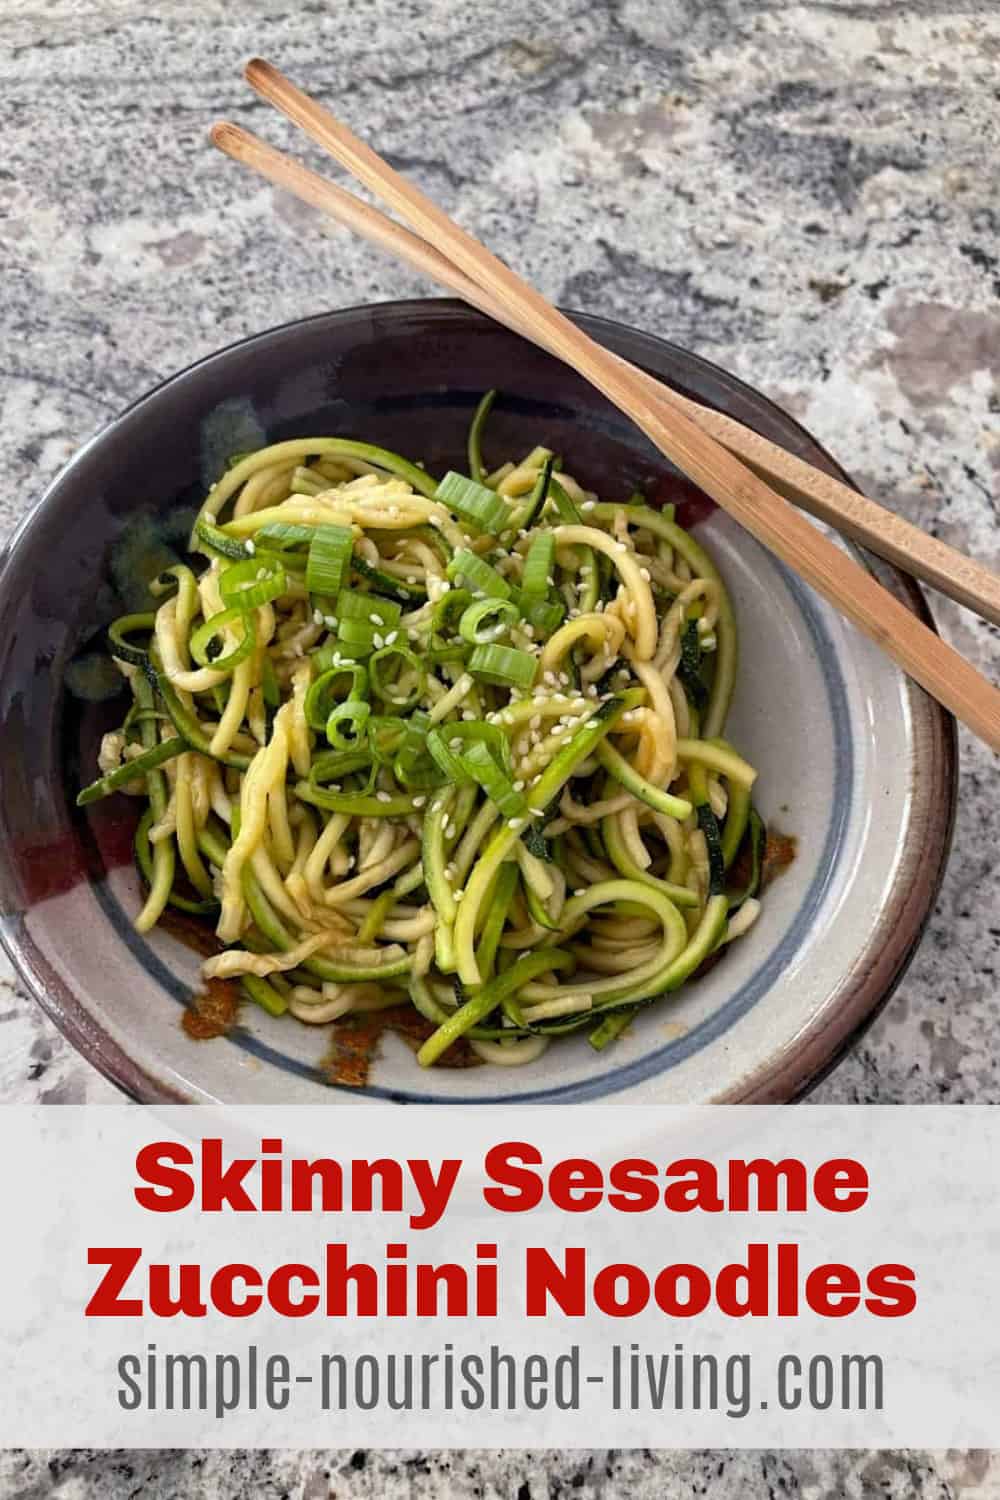 pottery bowl filled with skinny sesame zucchini noodles on granite countertop. Chopsticks balancing on right side of bowl.